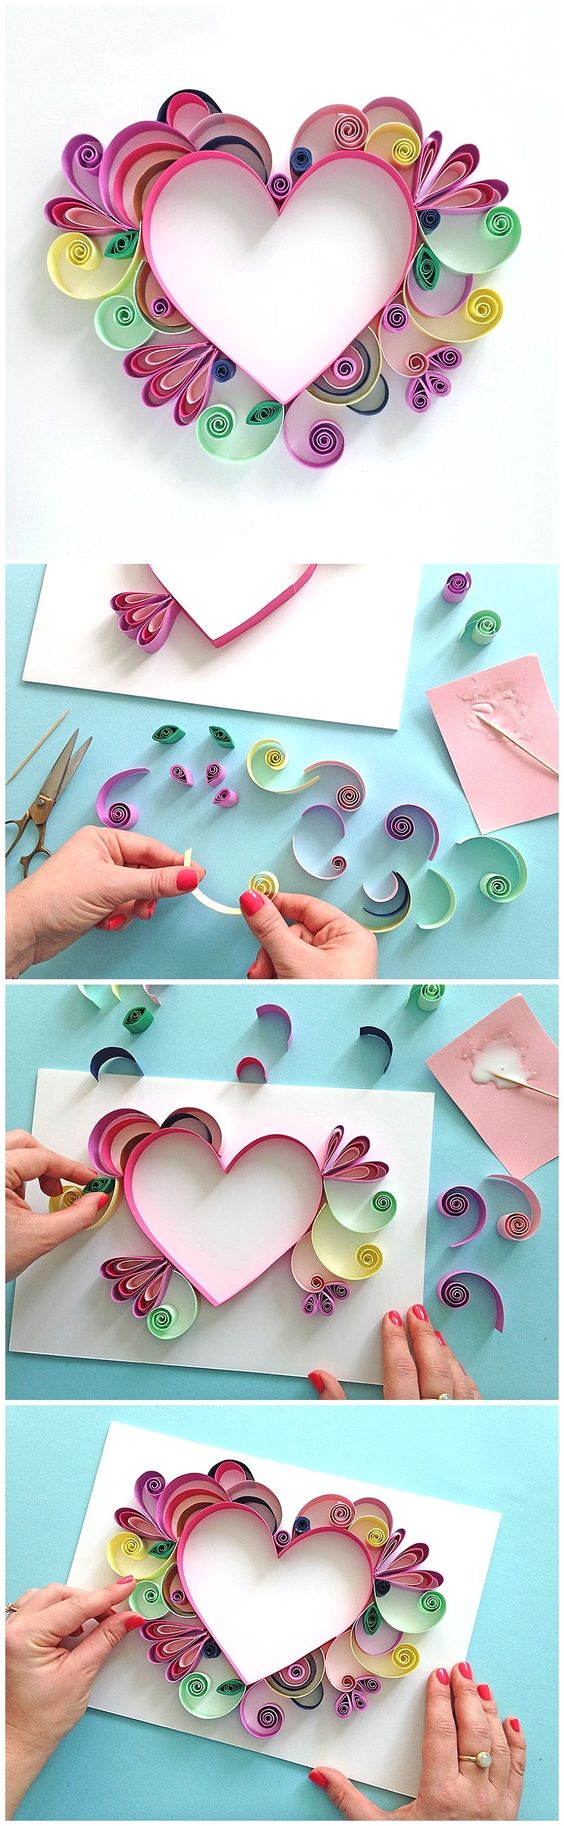 Heart Shaped Quilling Paper Craft. 